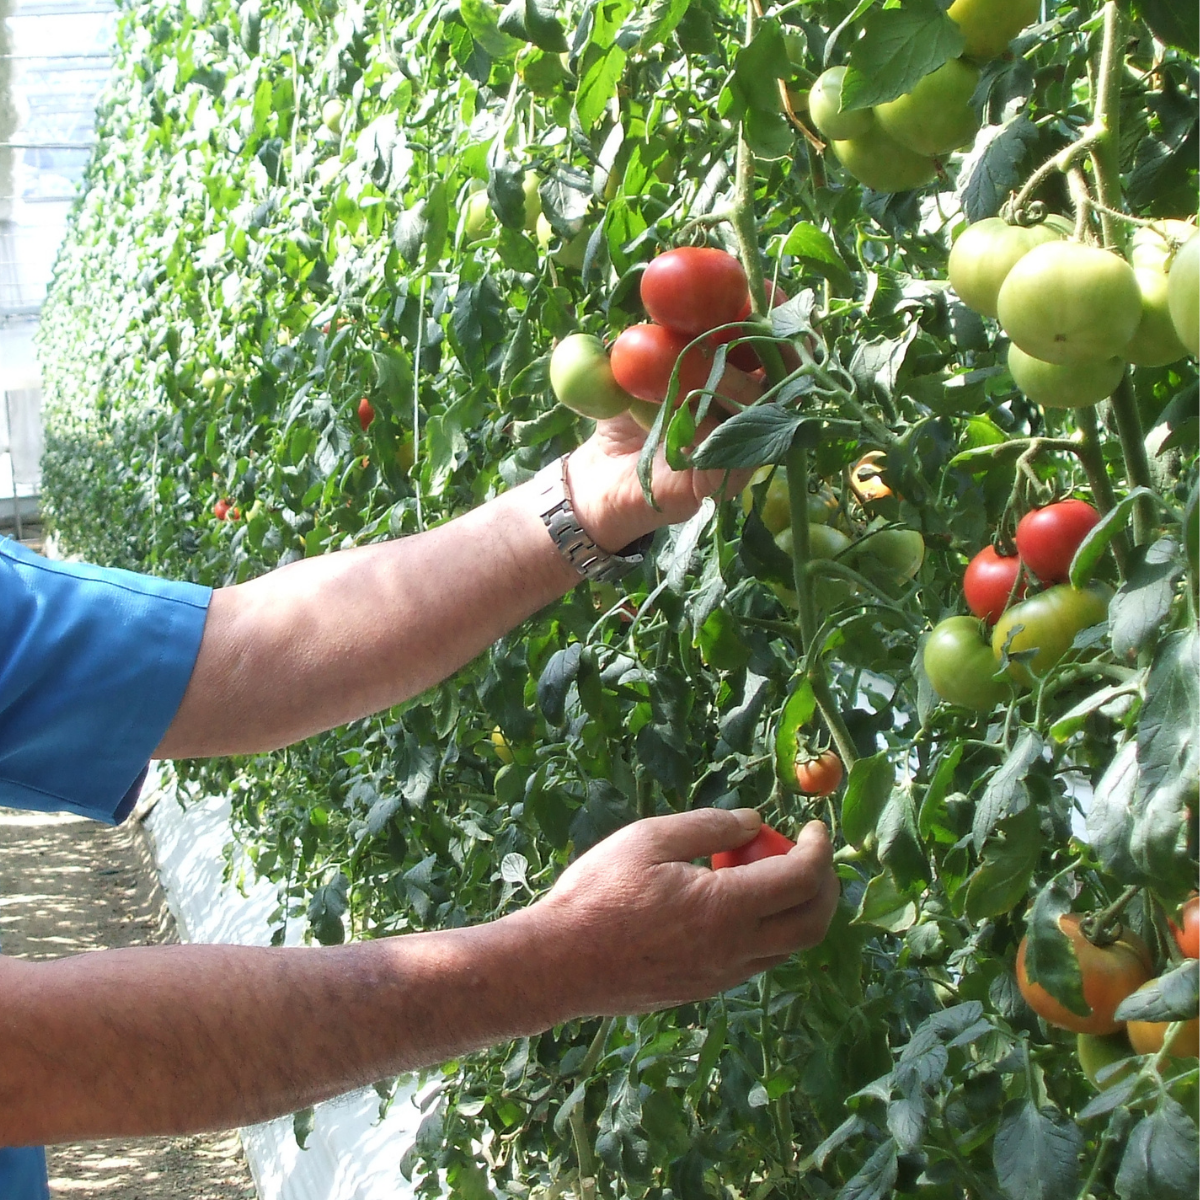 A farmer picking up a tomato